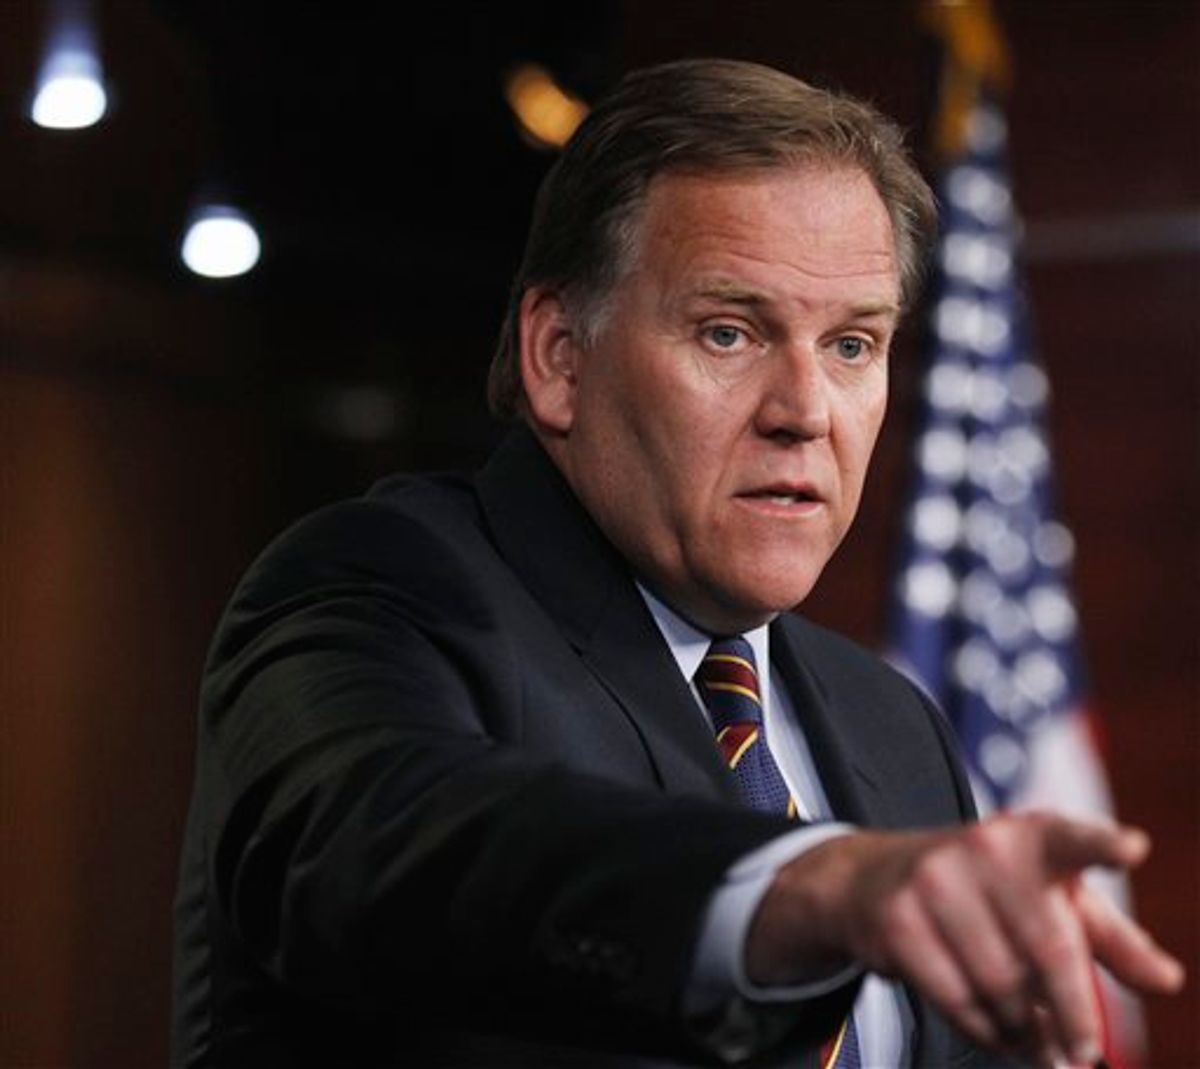 House Intelligence Committee Chairman Rep. Mike Rogers, R-Mich., speaks to reporters during a news conference on Capitol Hill in Washington, Monday, May 2, 2011, to talk about the death of Osama bin Laden.  (AP Photo/Manuel Balce Ceneta)   (AP)